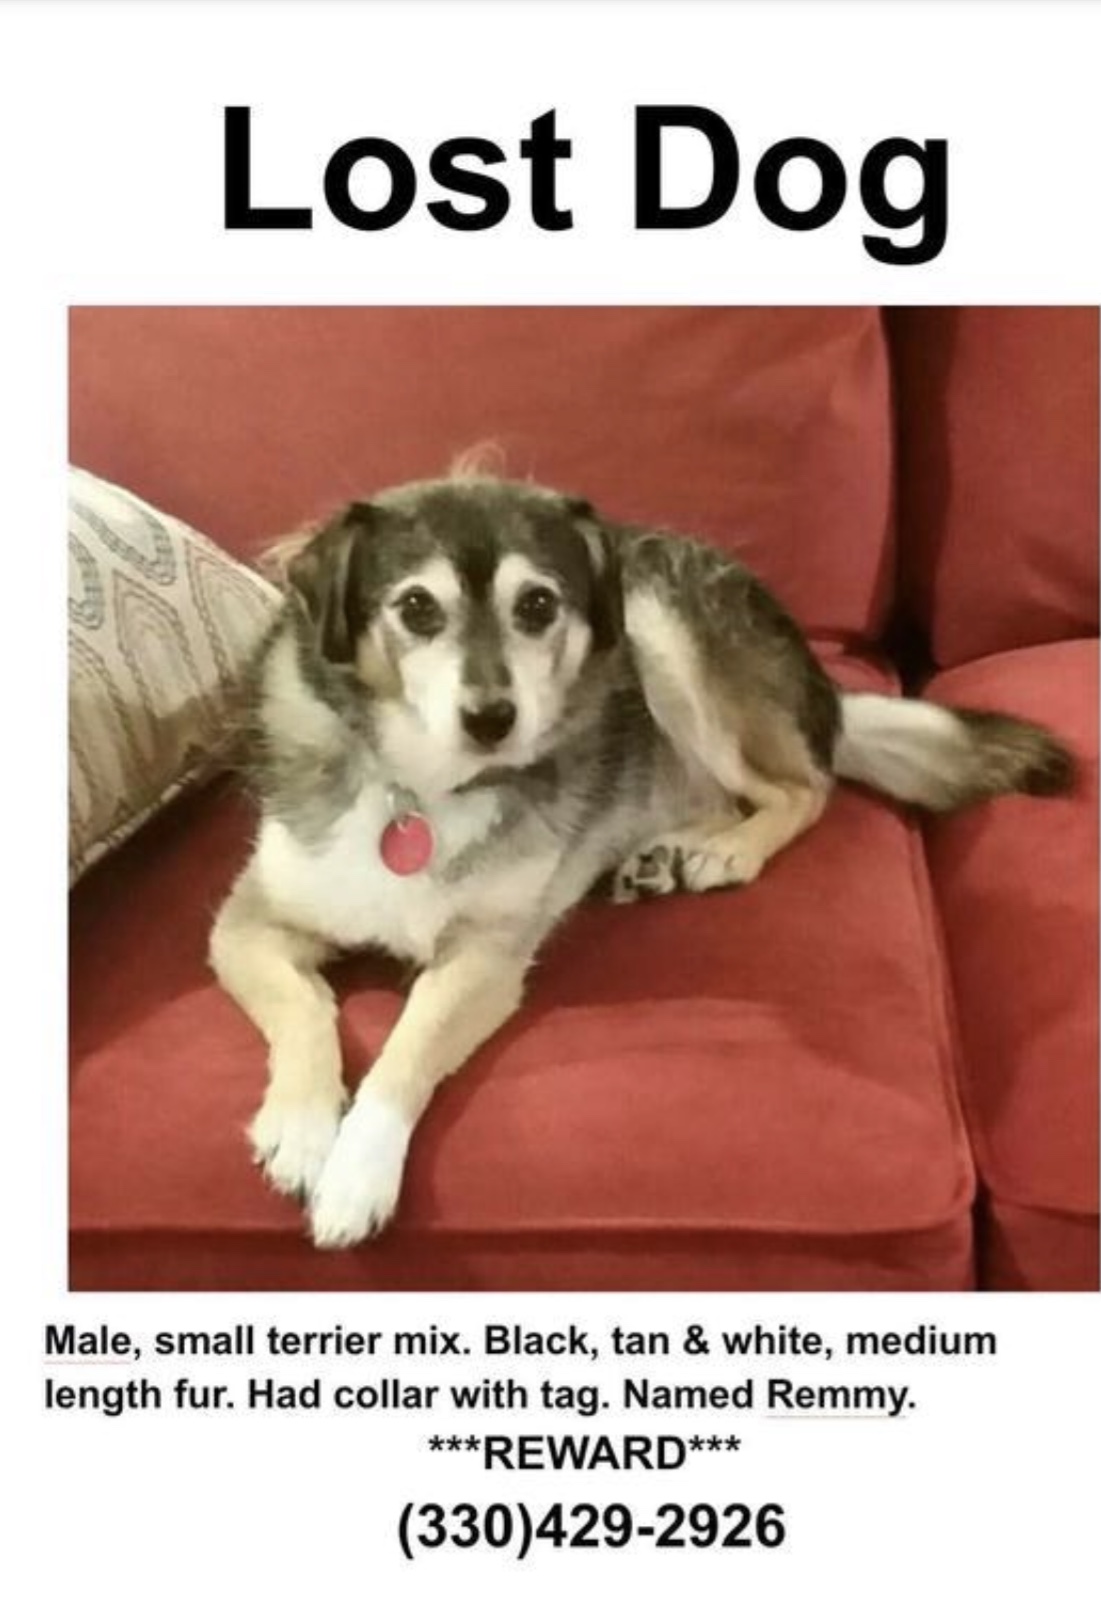 Image of Remmy, Lost Dog